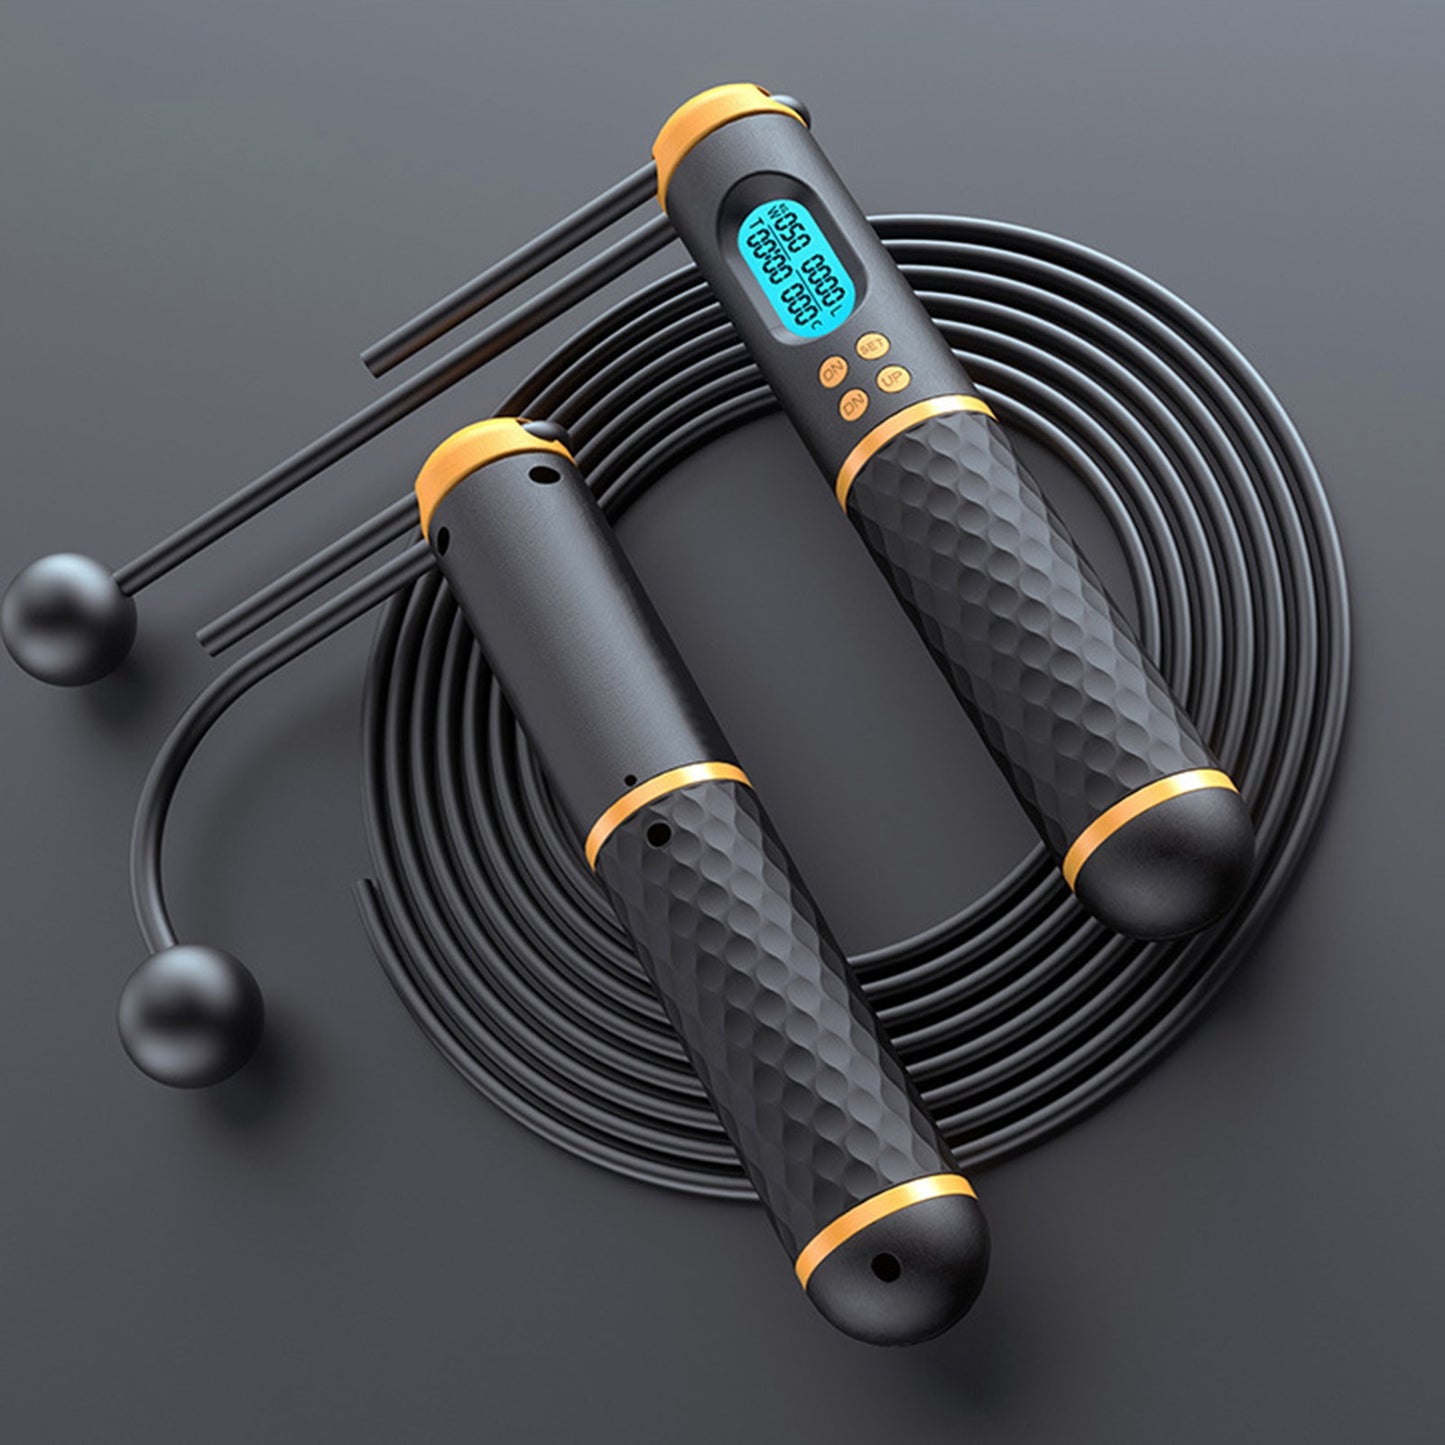 Smart Cordless 2-in-1 Fitness Skipping Rope with Digital Counter and LCD Display